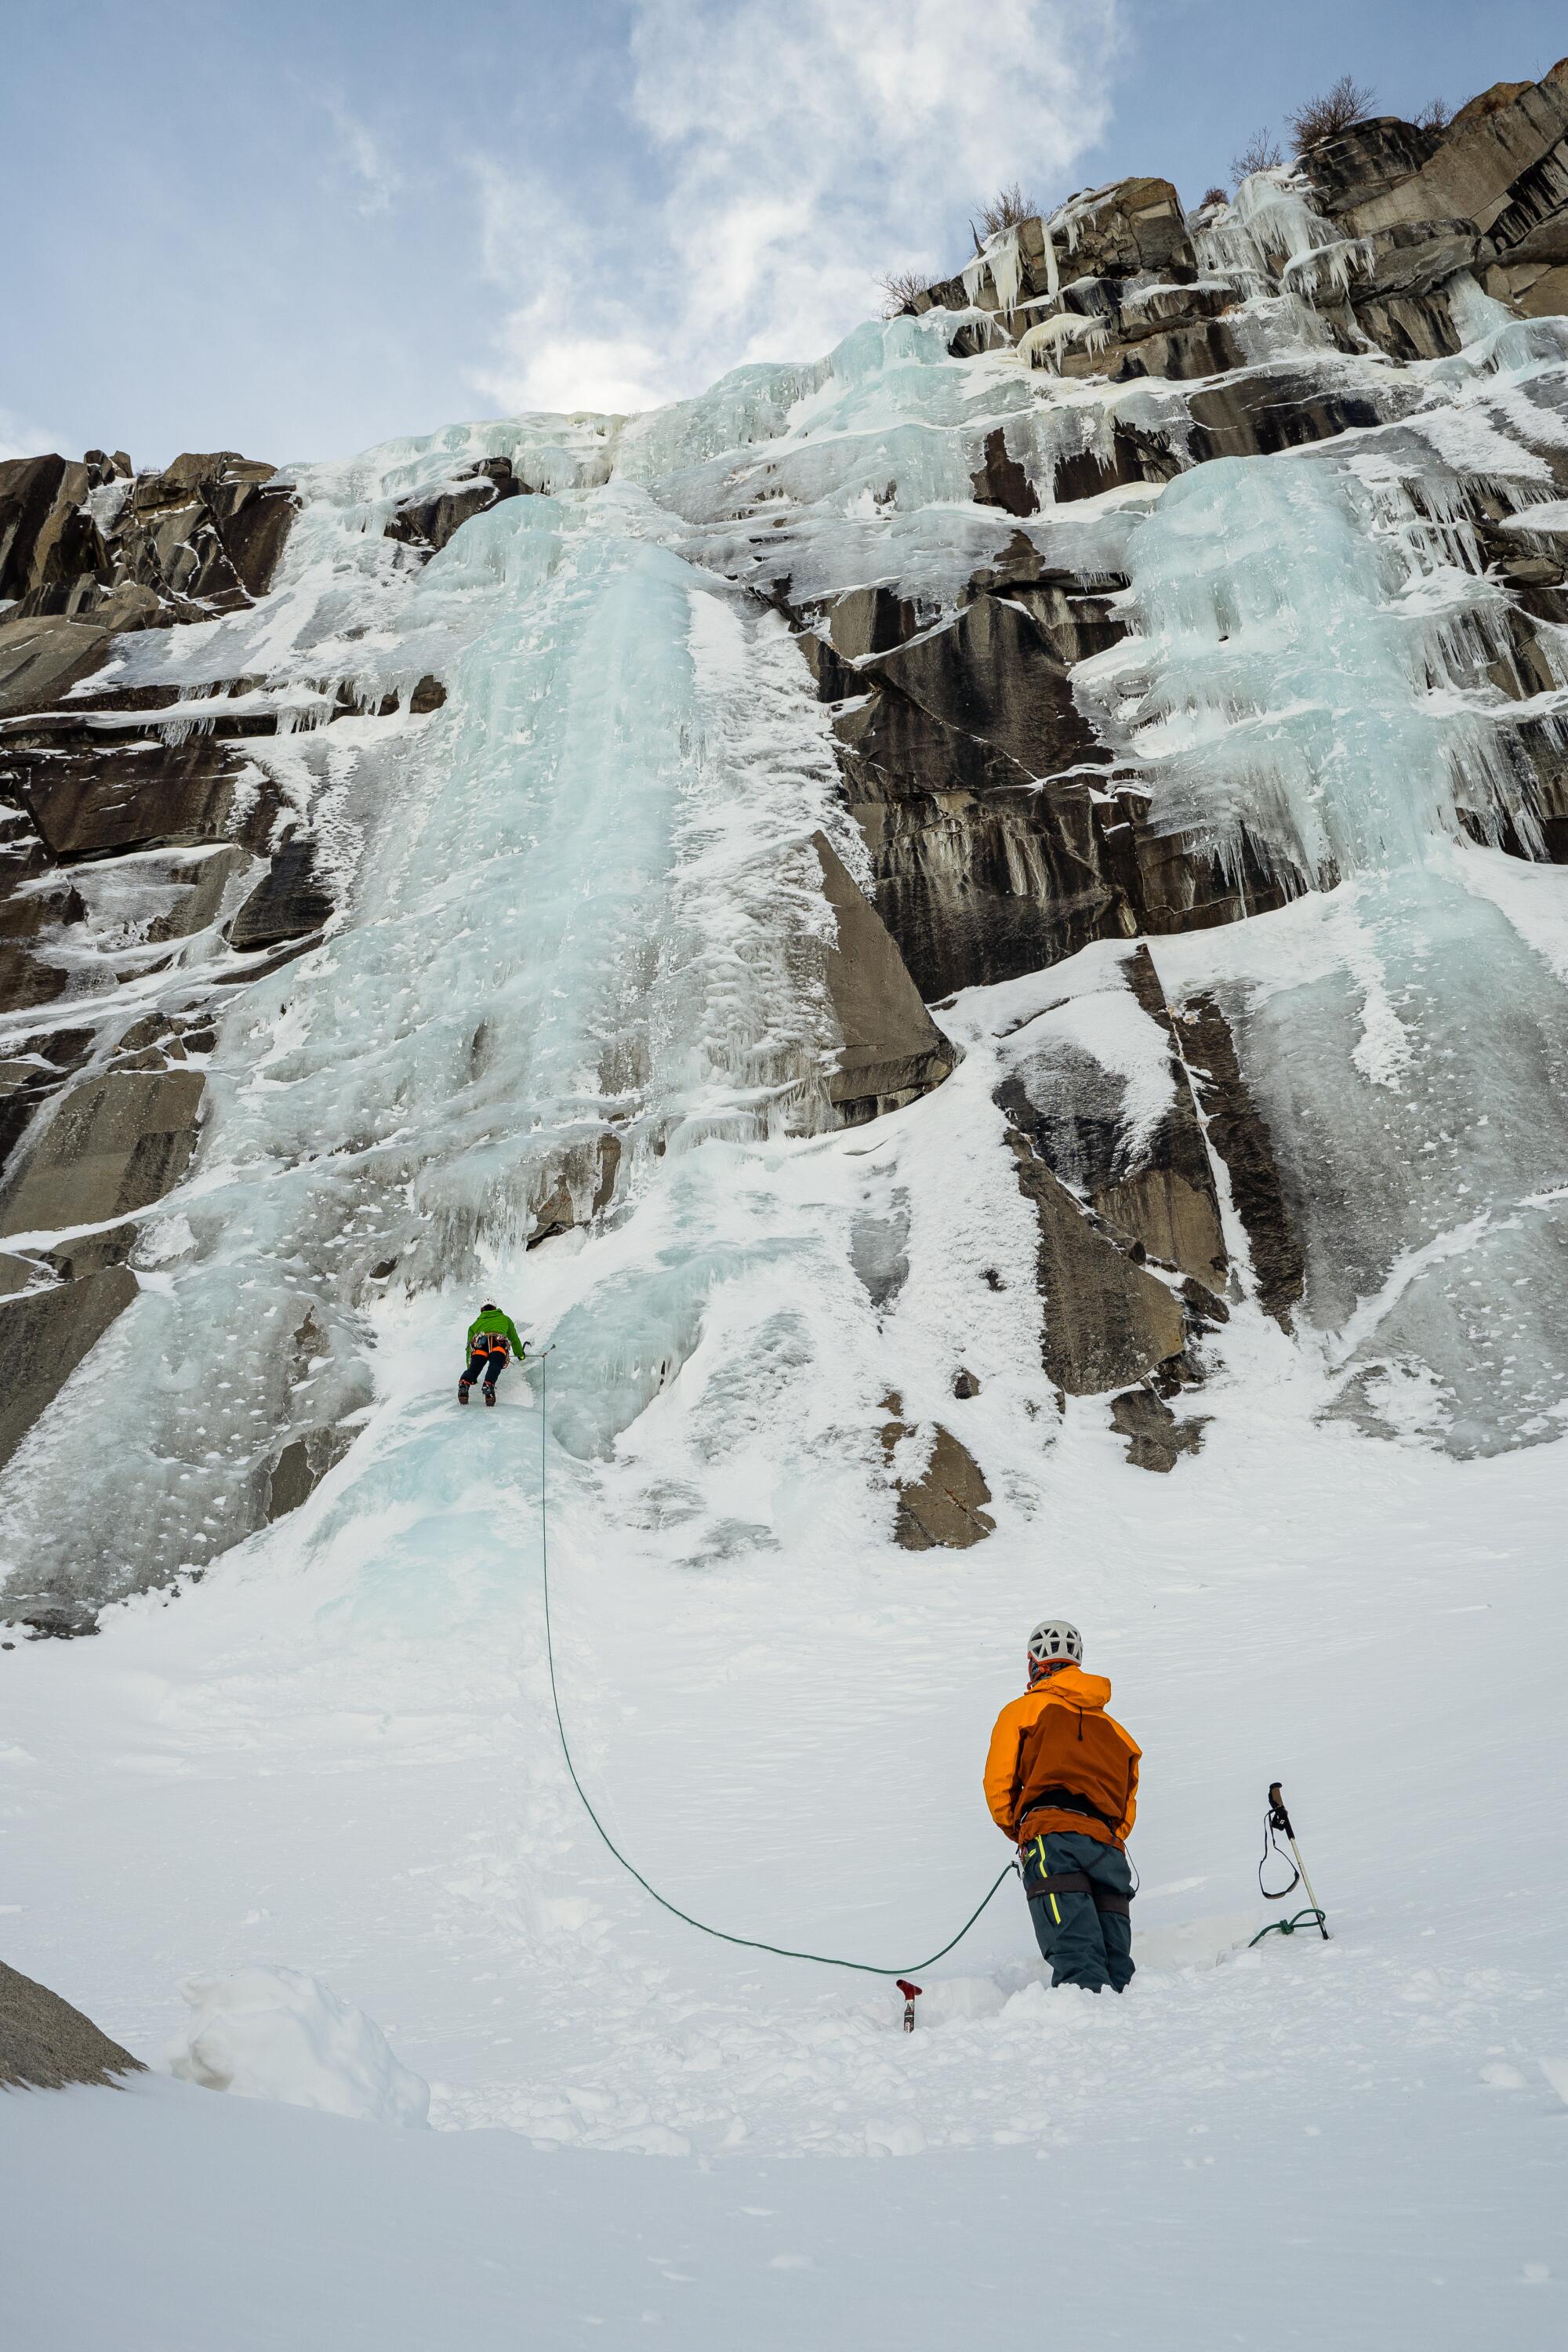 An ice climber stands at the base of a frozen waterfall, watching another climber some distance ahead